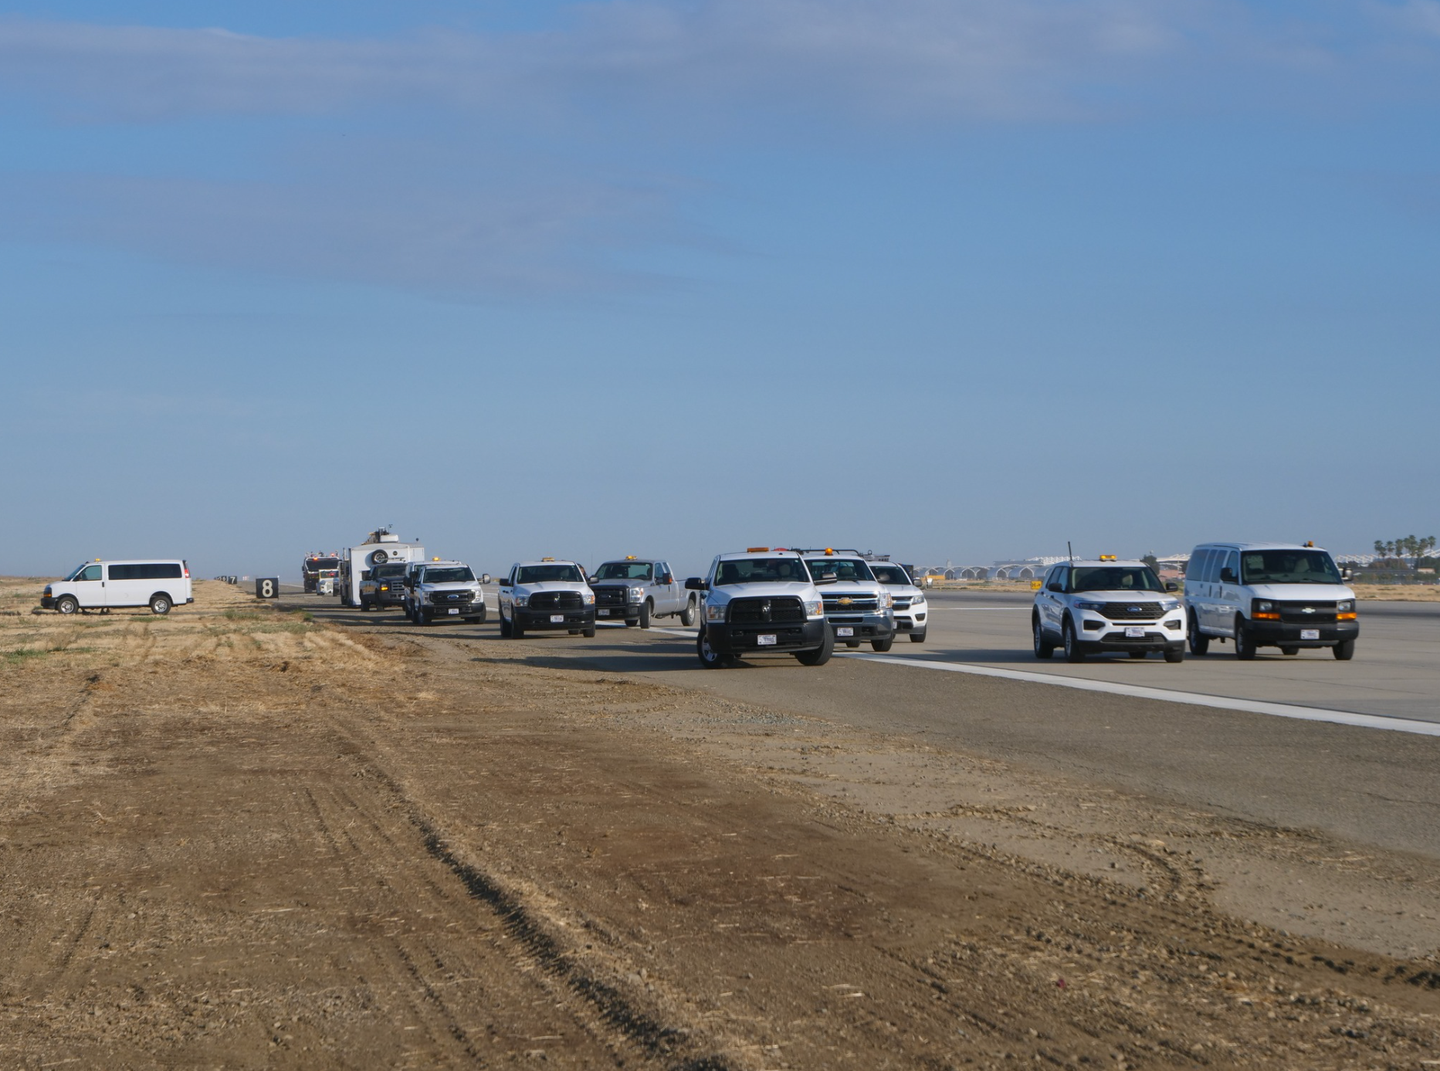 Some of the vehicles used by the different agencies that worked to recover the F-16 after its runway departure. <em>U.S. Navy/NAS Lemoore</em>